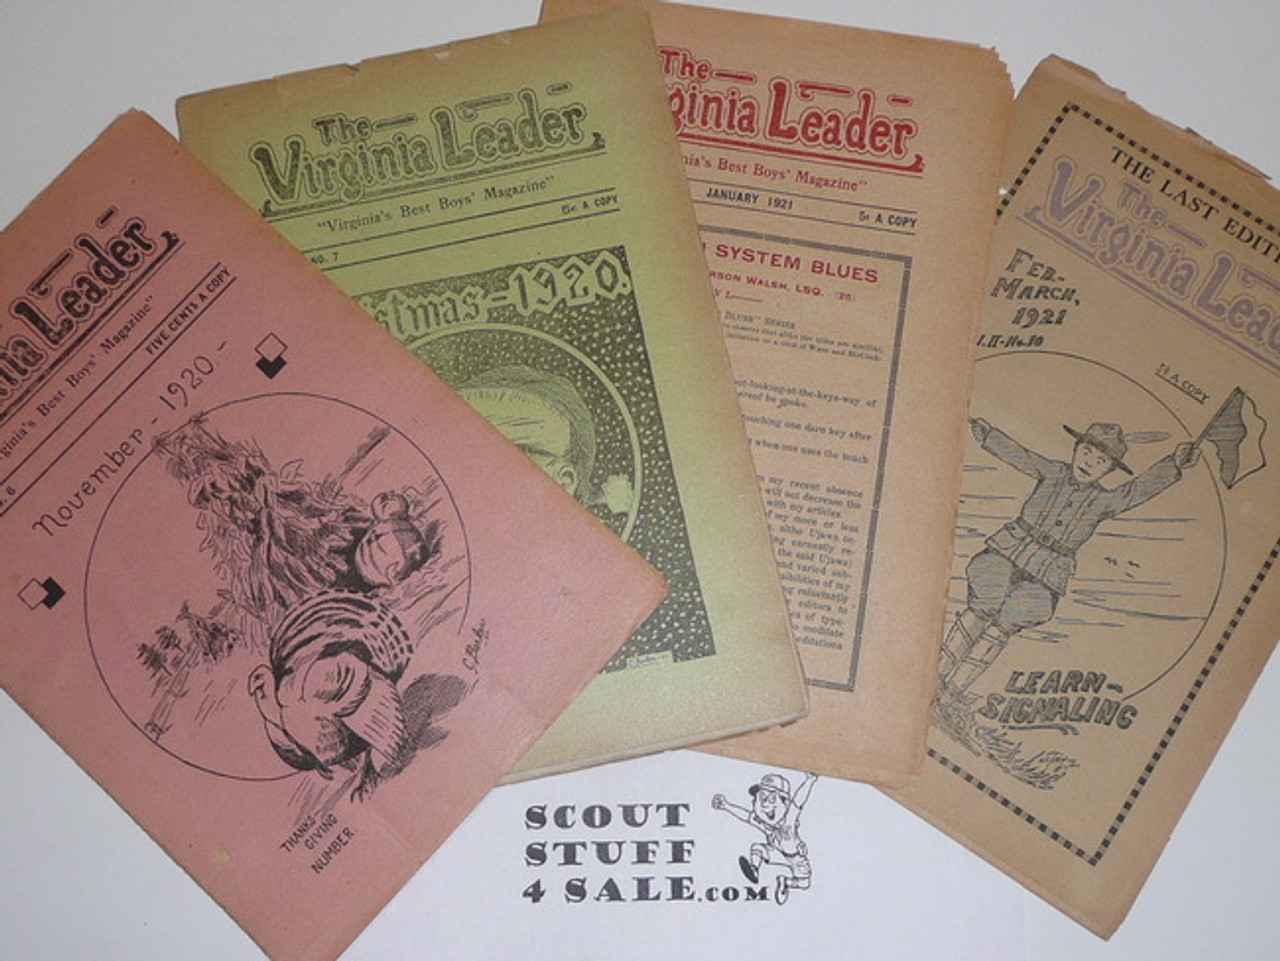 1920-1921 7 Issues of the Virginia Leader